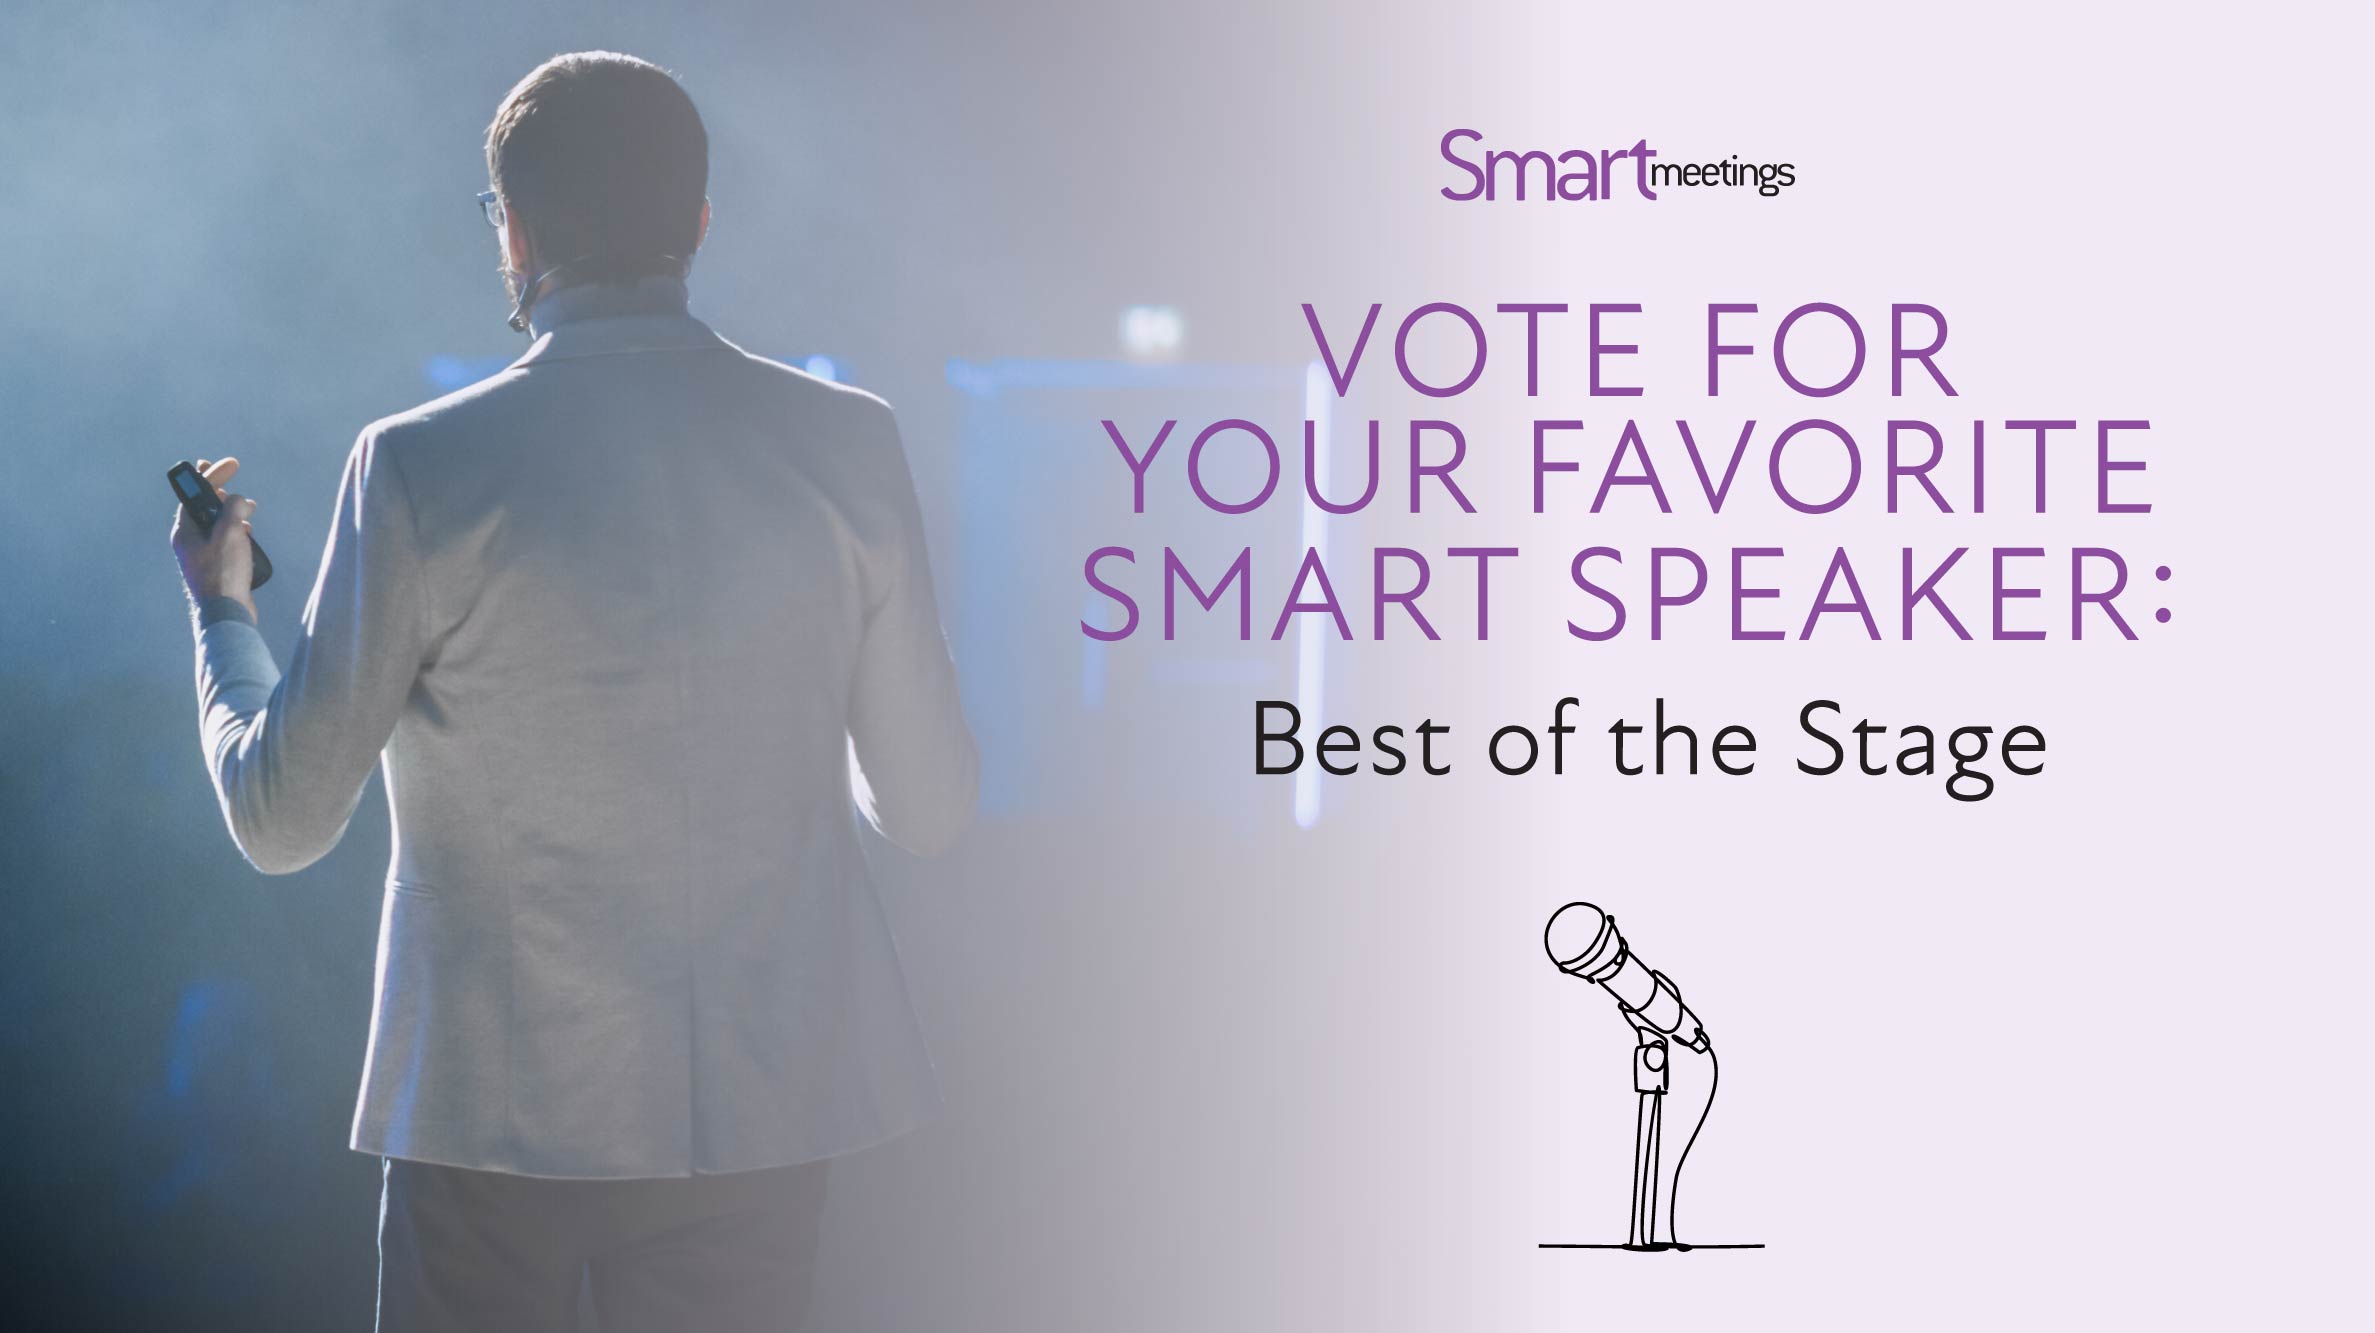 posterior shot of speaker on stage, to the left of words that read "vote for your favorite smart speaker"